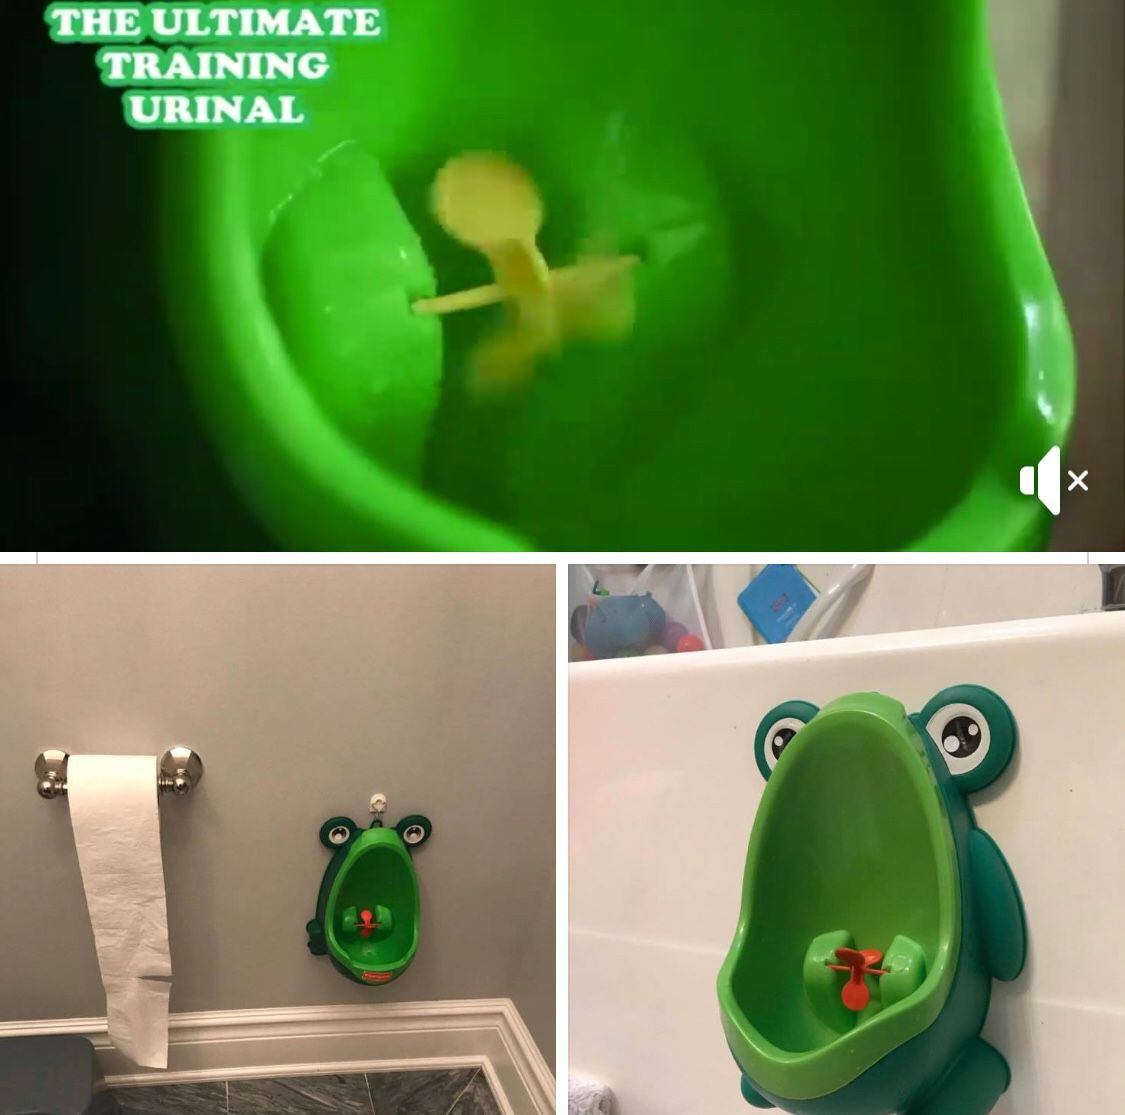 Blackish Green Foryee Cute Frog Potty Training Urinal for Boys with Funny Aiming Target